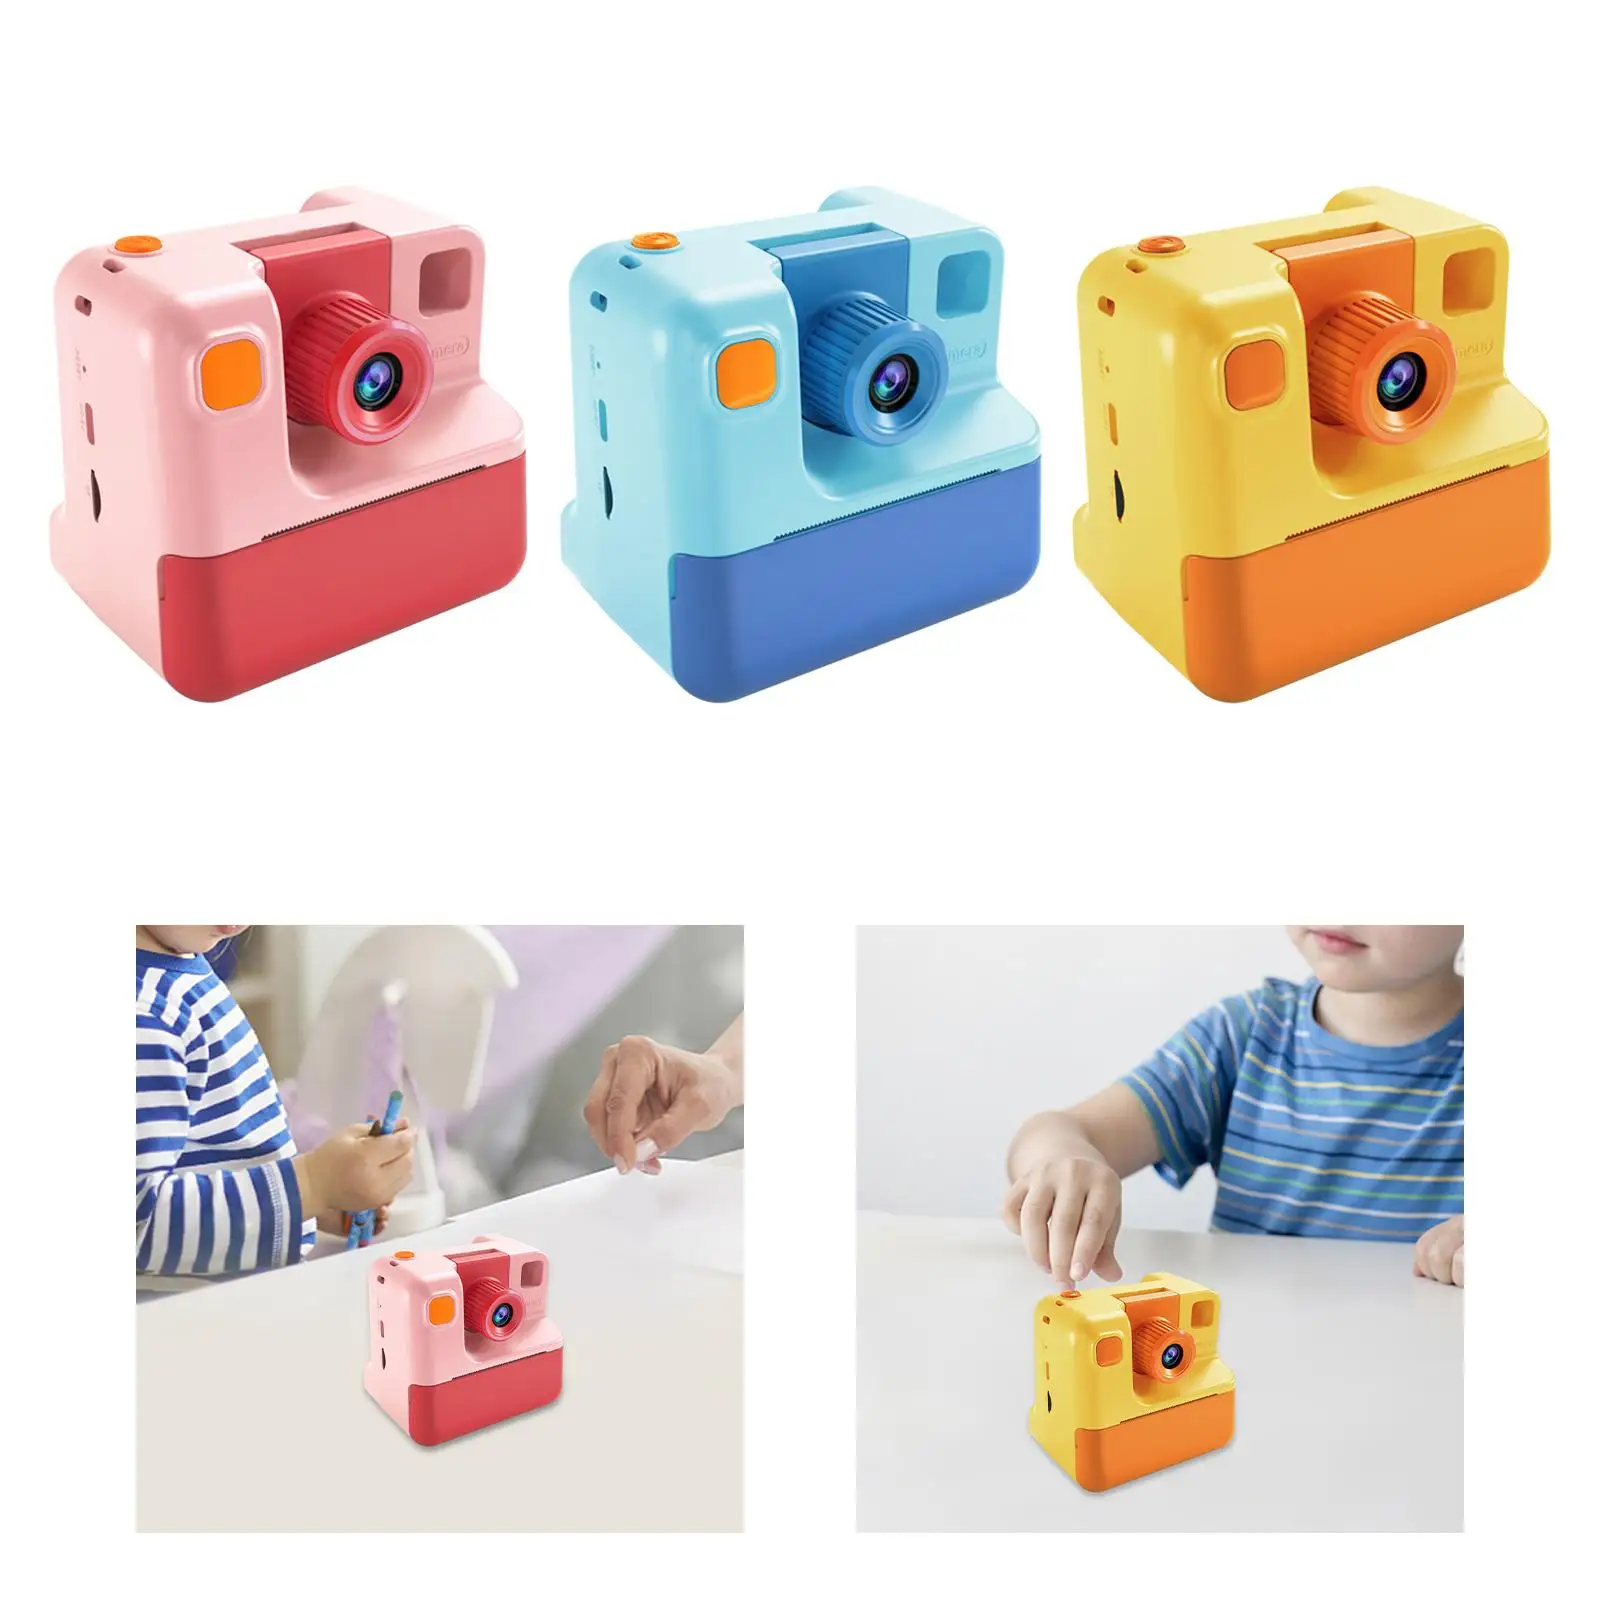 Kids Instant Print Camera Children Toy Novelty Small Educational Toys Portable for Children Ages 3 4 5 6 Year Old Boys and Girls